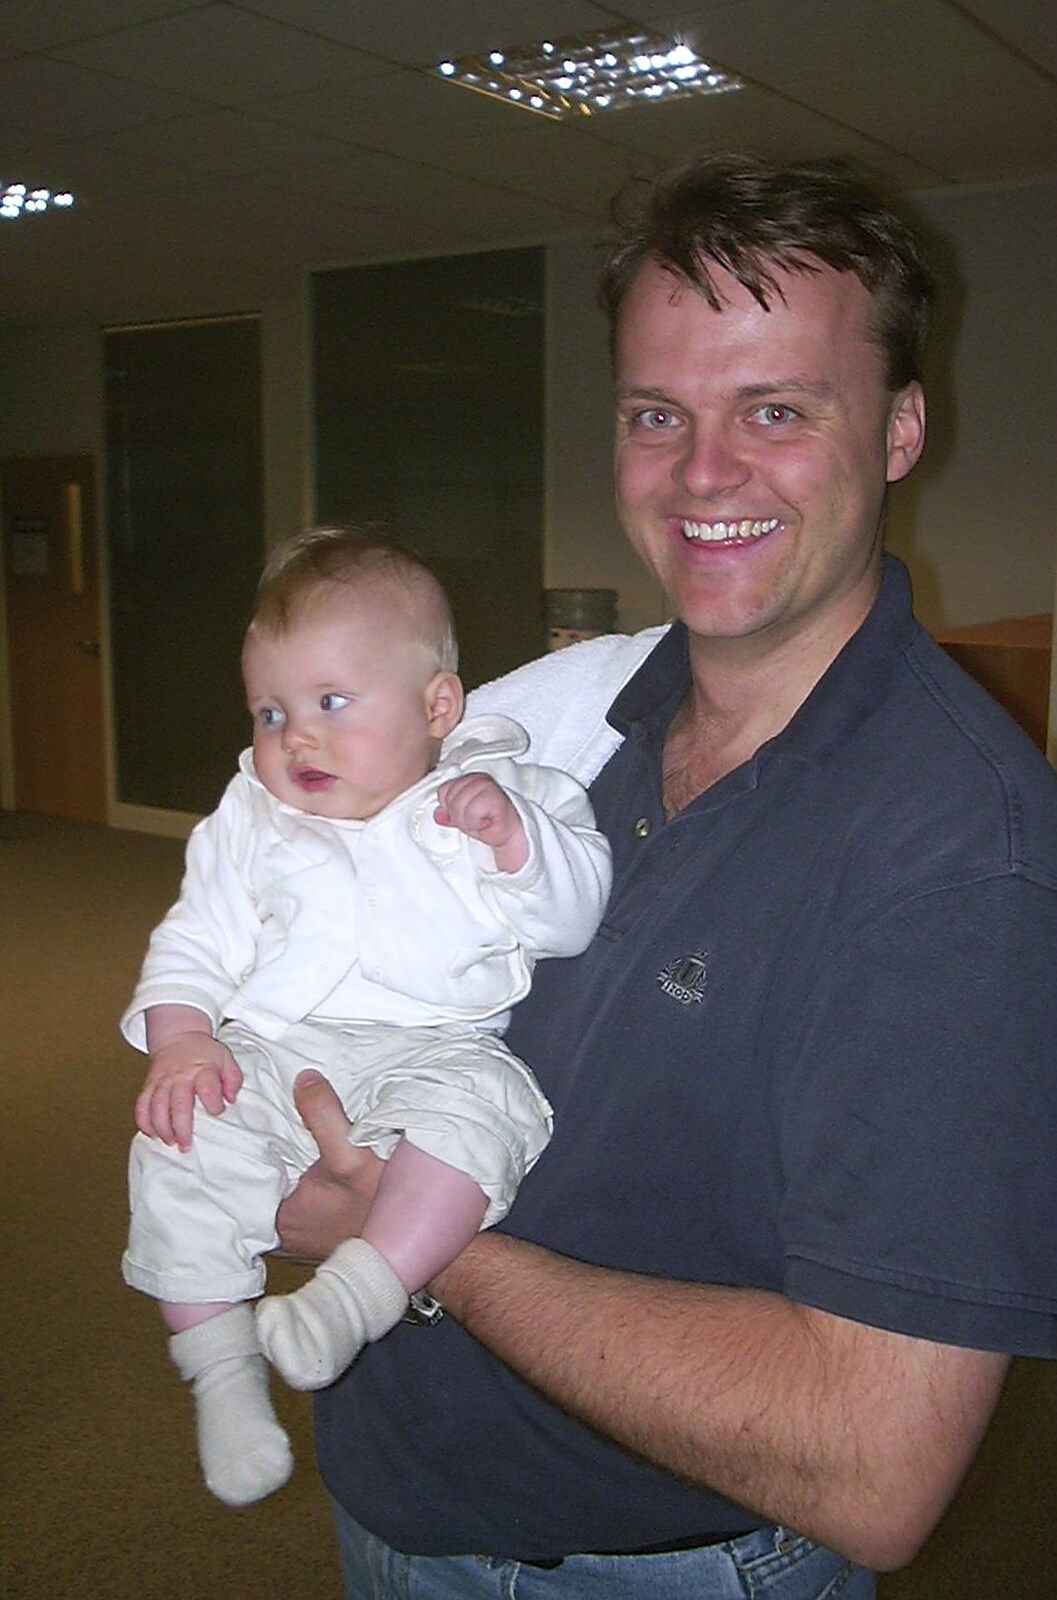 In Cambridge, Nick has bought his new sprog in from Longview at the Waterfront, and a Trip to the Shops, Norwich, Norfolk - 27th June 2004